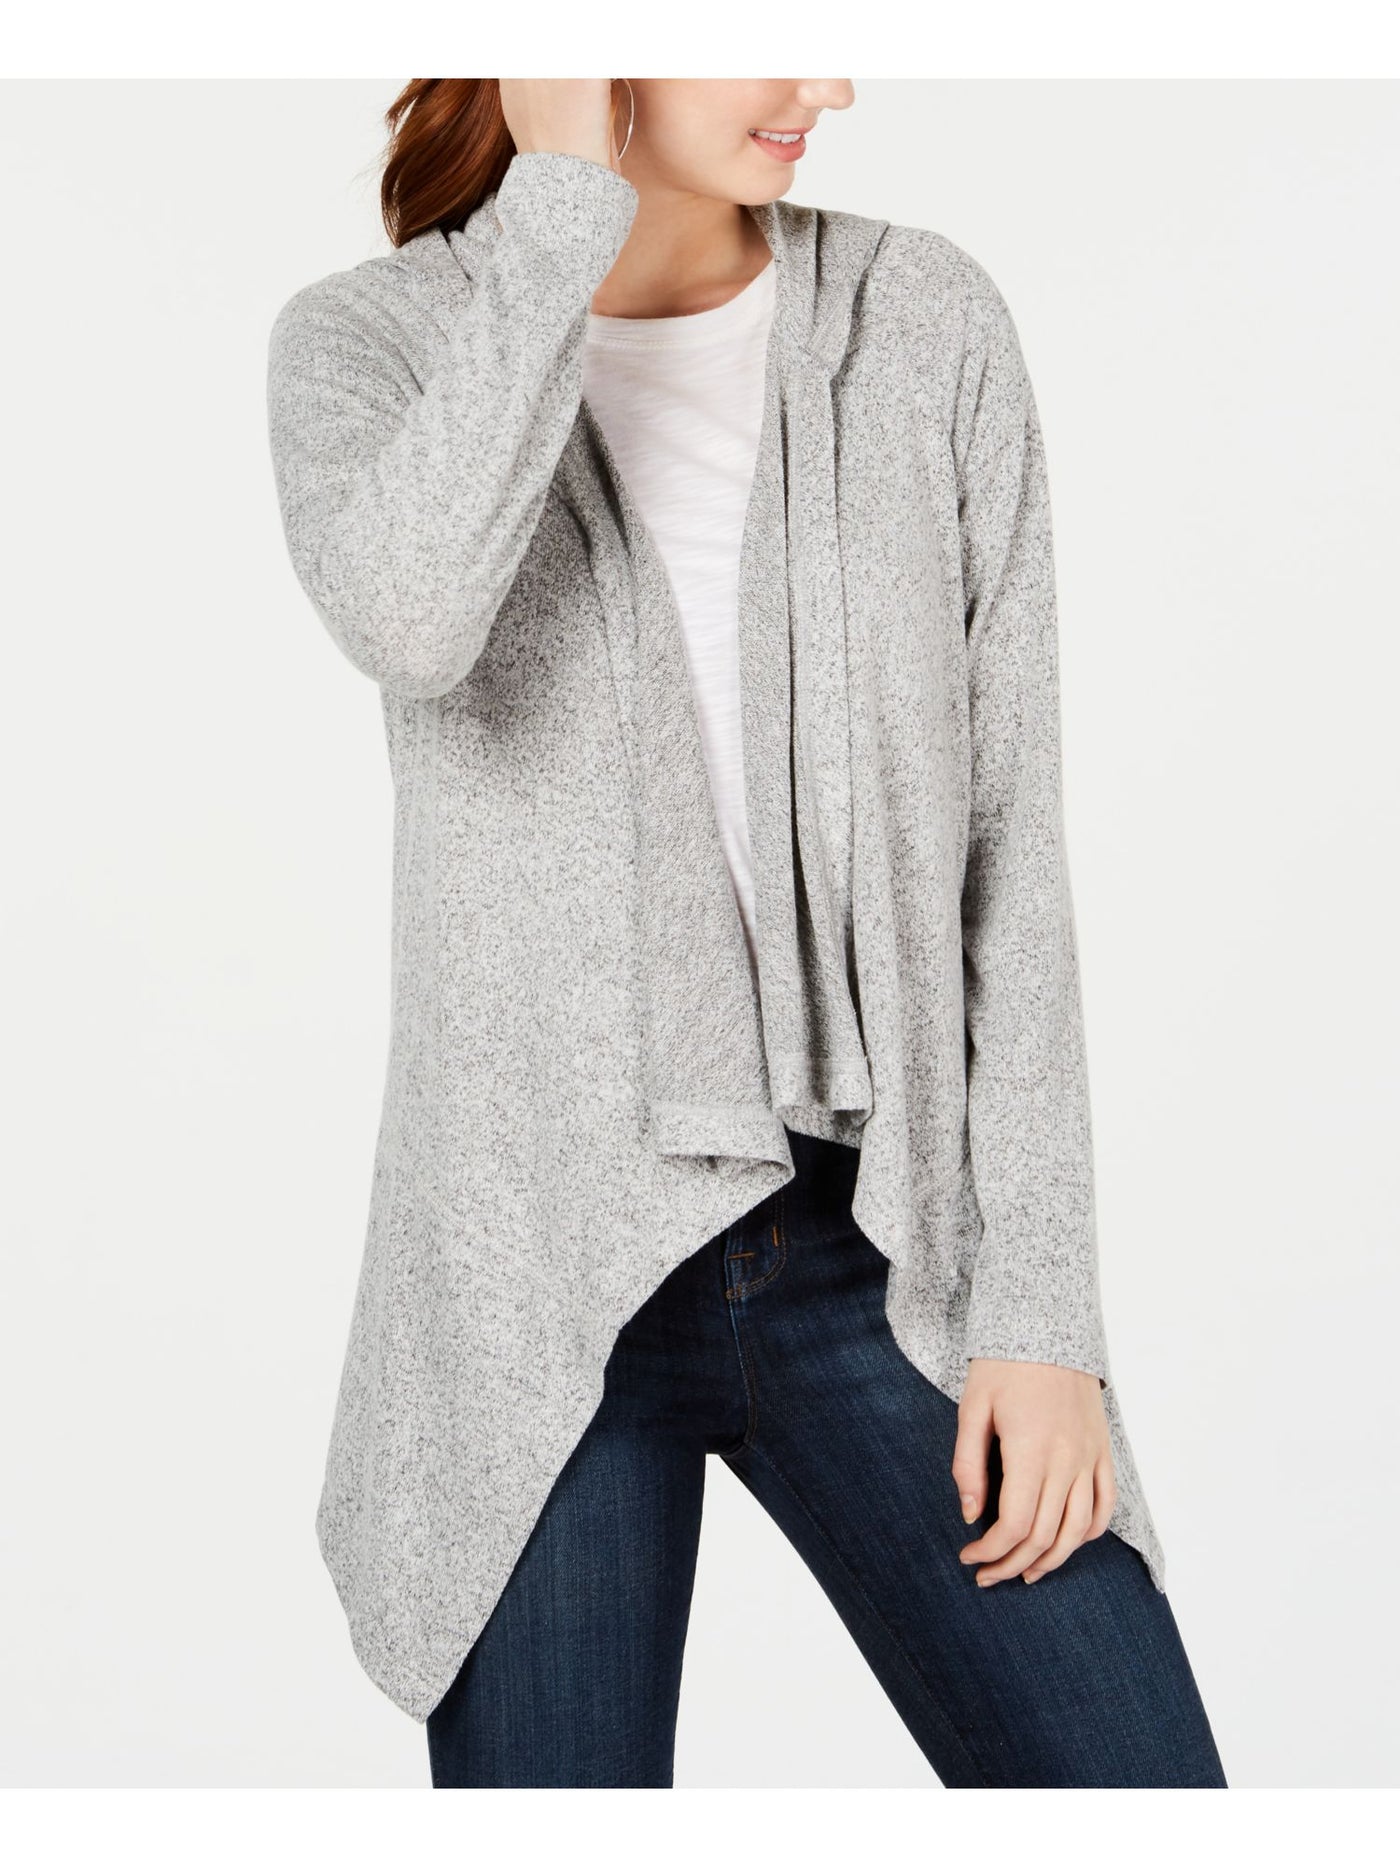 HOOKED UP Womens Gray Long Sleeve Open Cardigan Sweater S